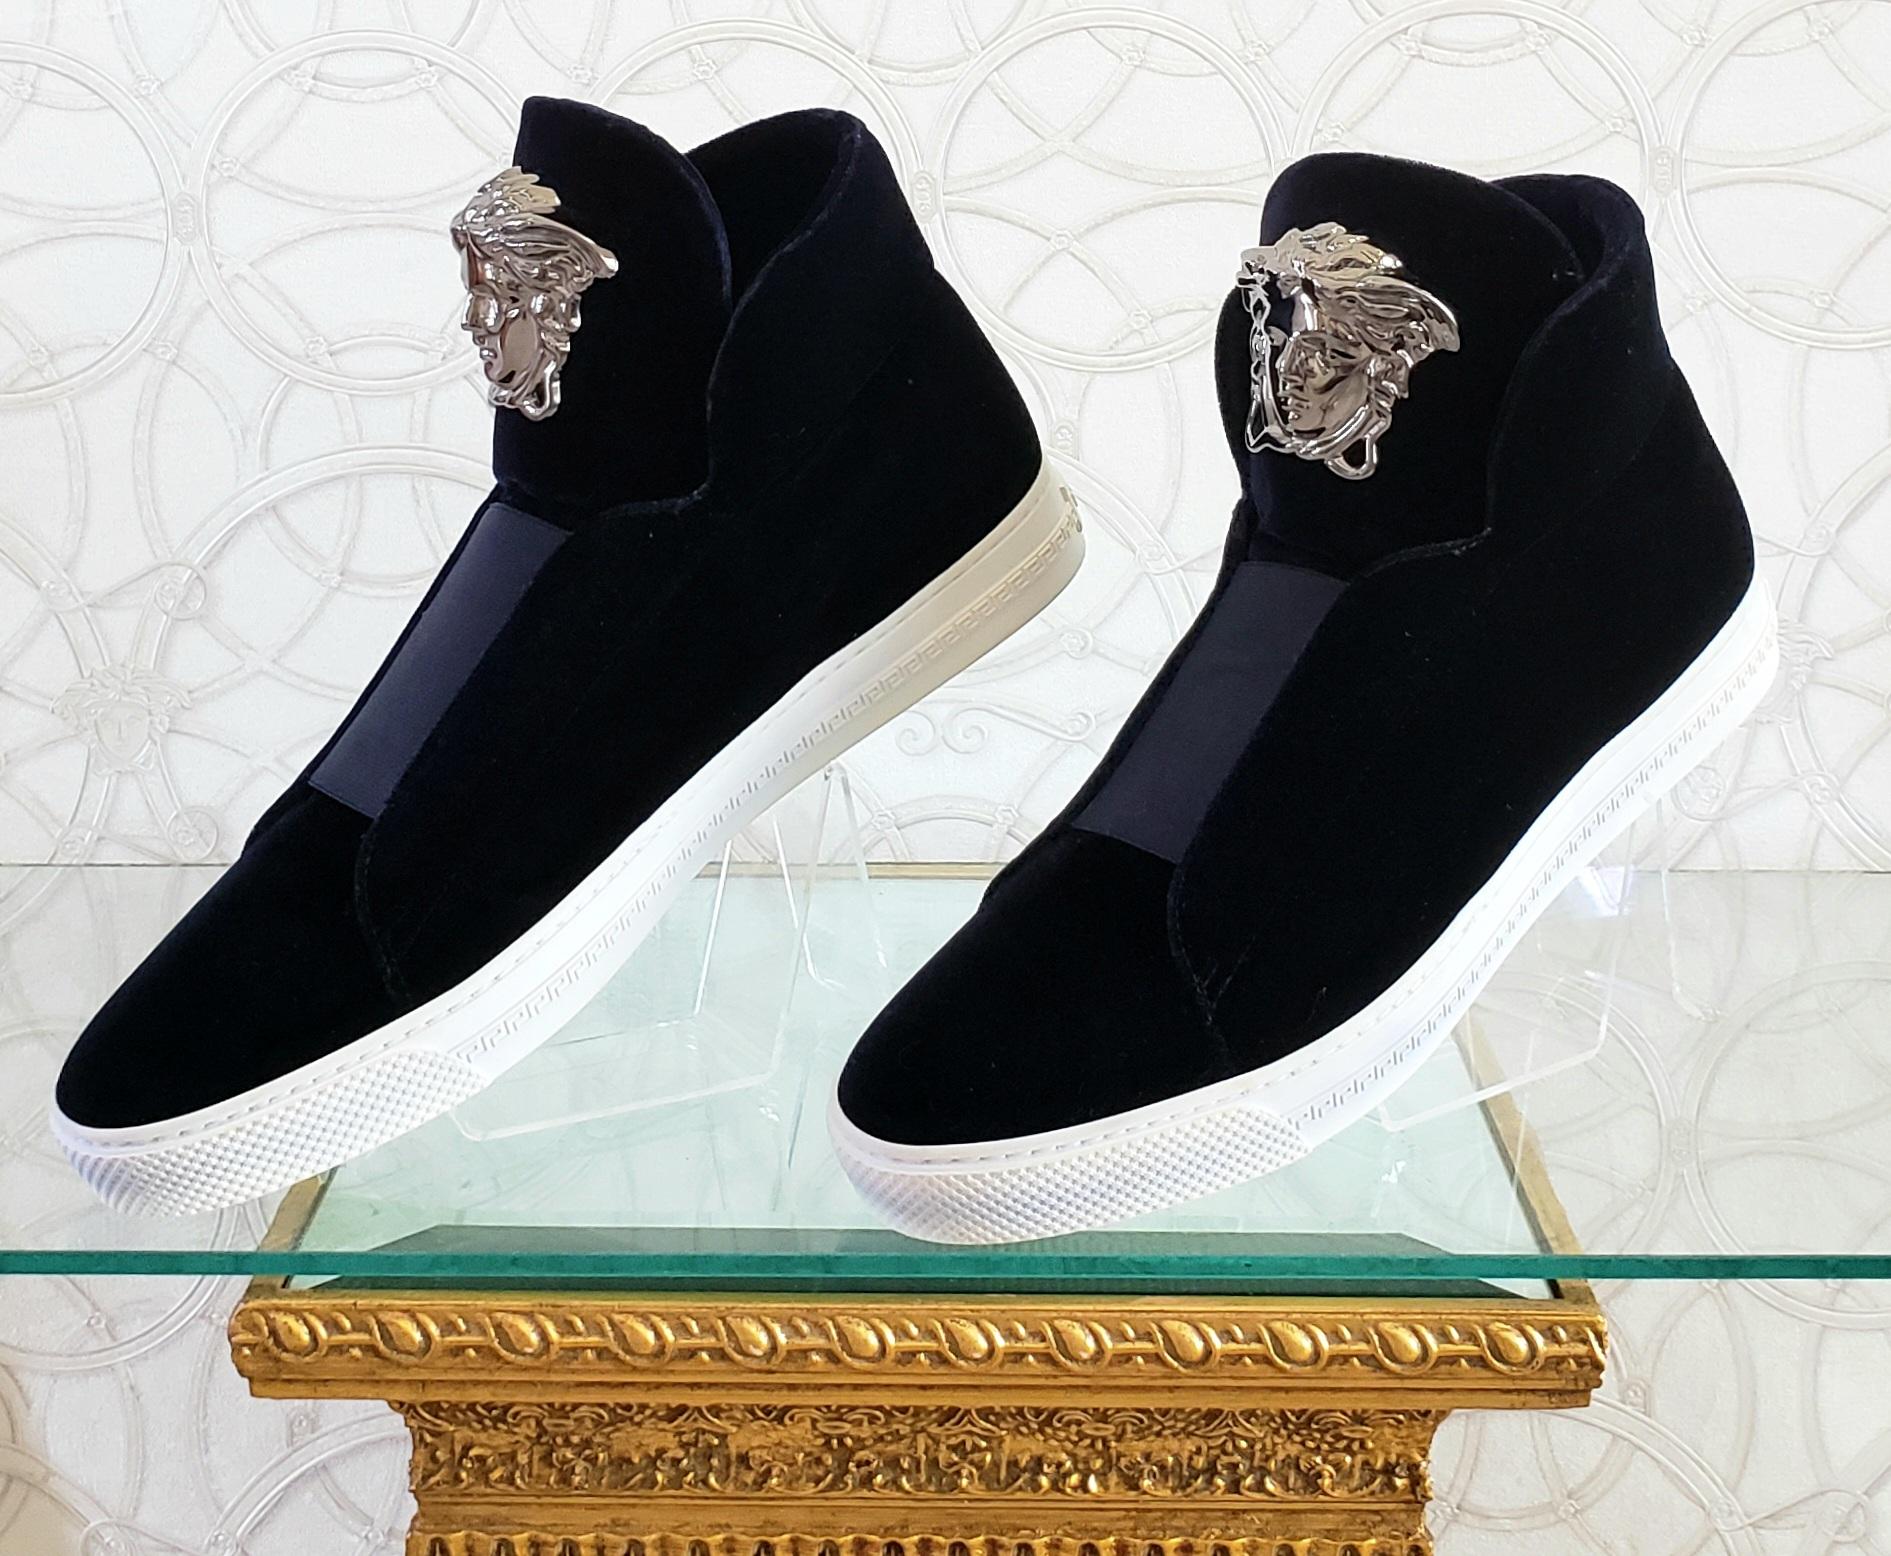 VERSACE 



Palazzo sneakers 

This shoe is embodied in true Versace-style and

 features navy blue velvet with silver iconic Medusa. 

It wouldn’t be Versace without it.



Made in Italy

       Italian size is 43.5 - US 10.5  
Has a little